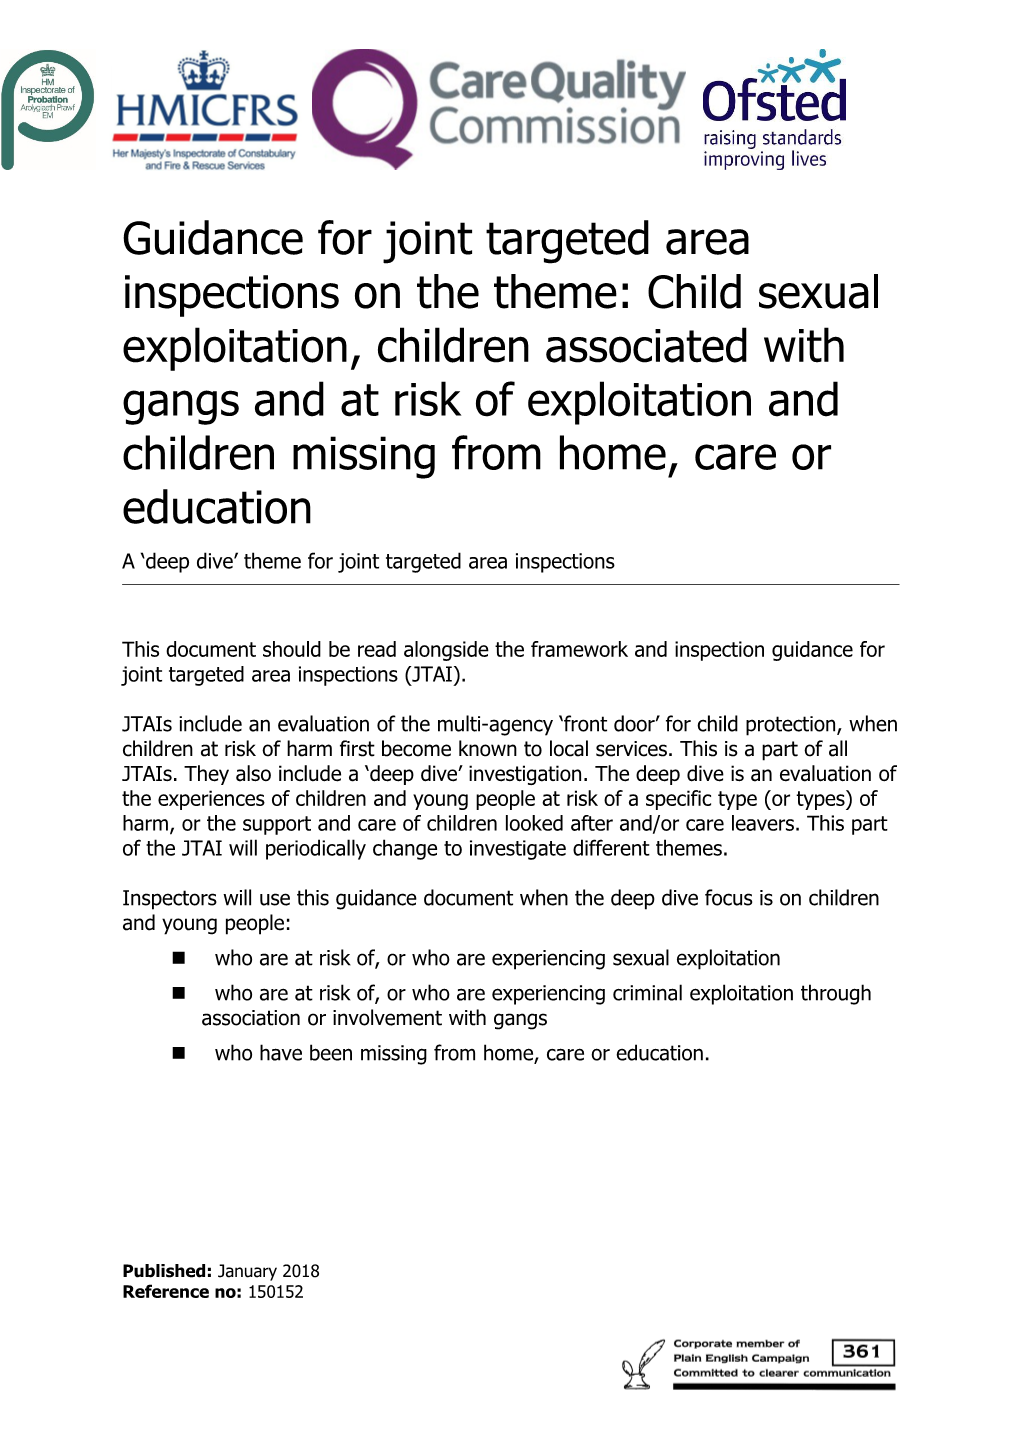 Guidance for Joint Targeted Area Inspections on the Theme: Child Sexual Exploitation, Children